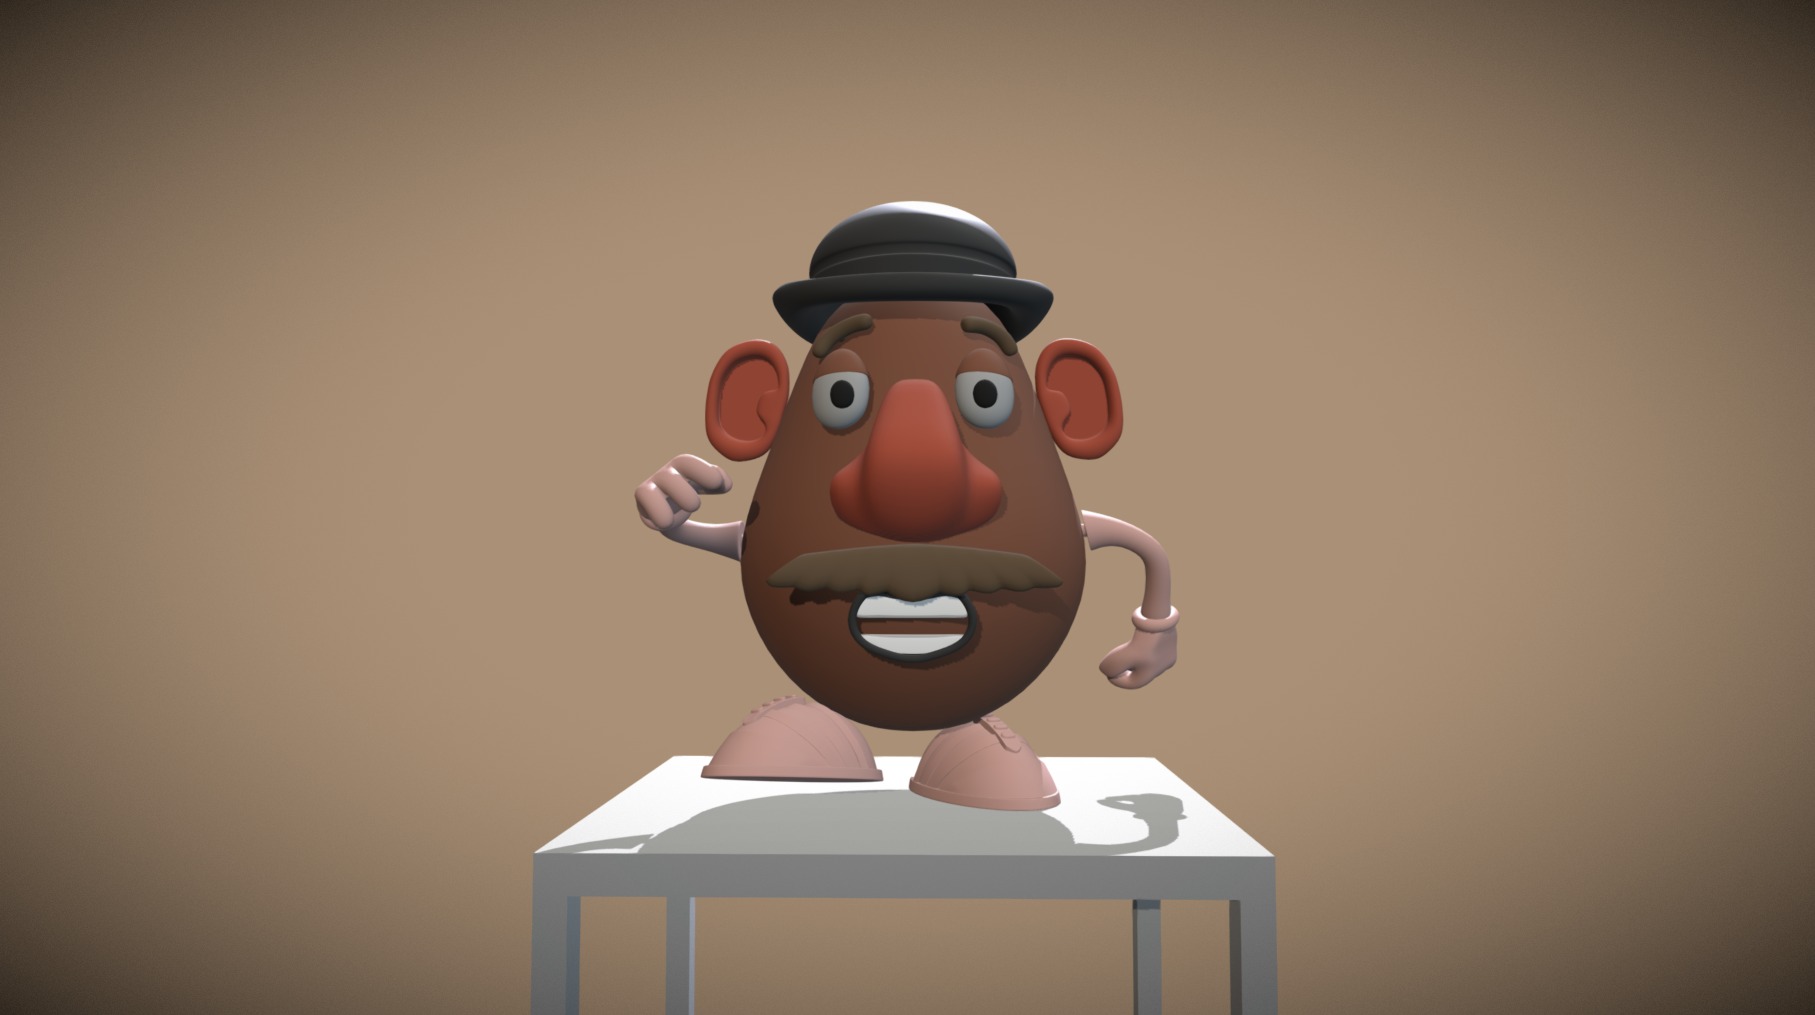 This is a re-upload of my Mr Potato Head. I've smoothed out the mesh to make him look better. Again, I did not create this model, I simply put the part togehter to form him as this was one of my task at University 3d model